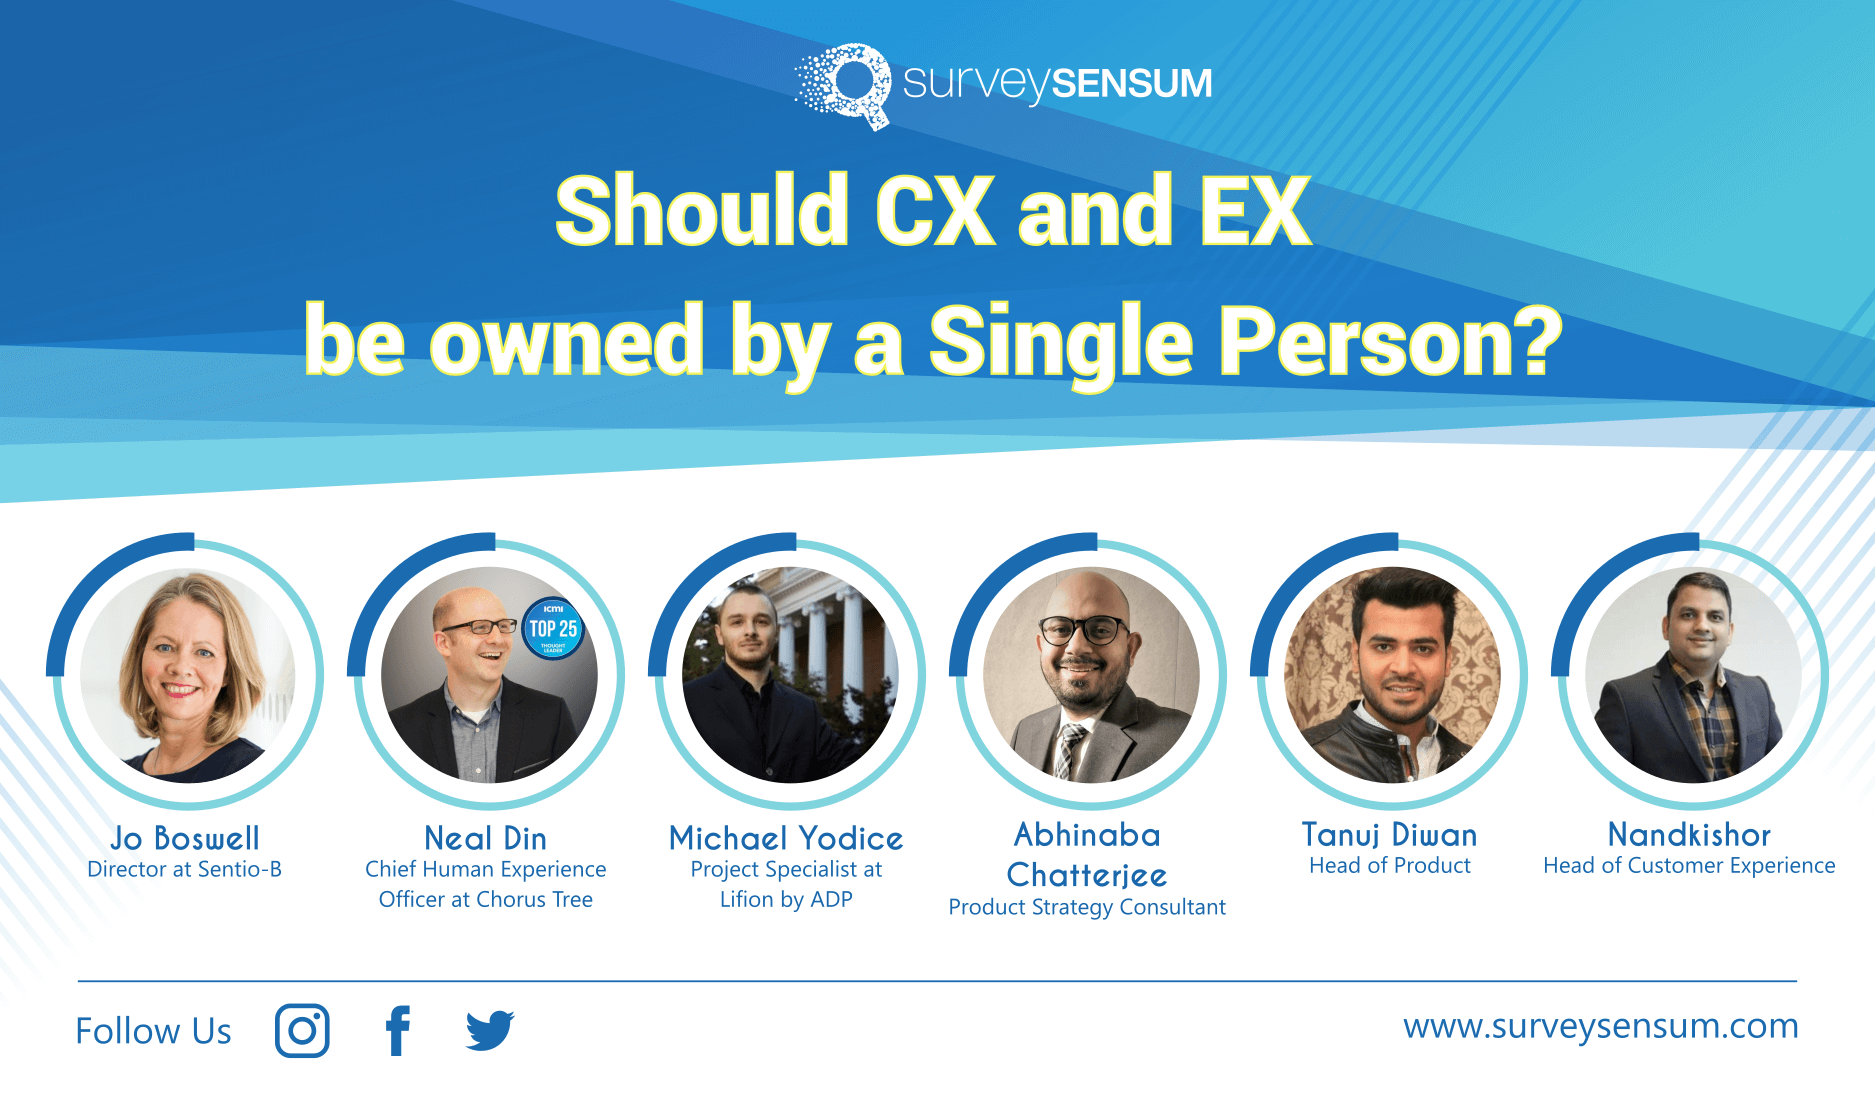 Chapter 8: Should CX and EX be owned by a single person?